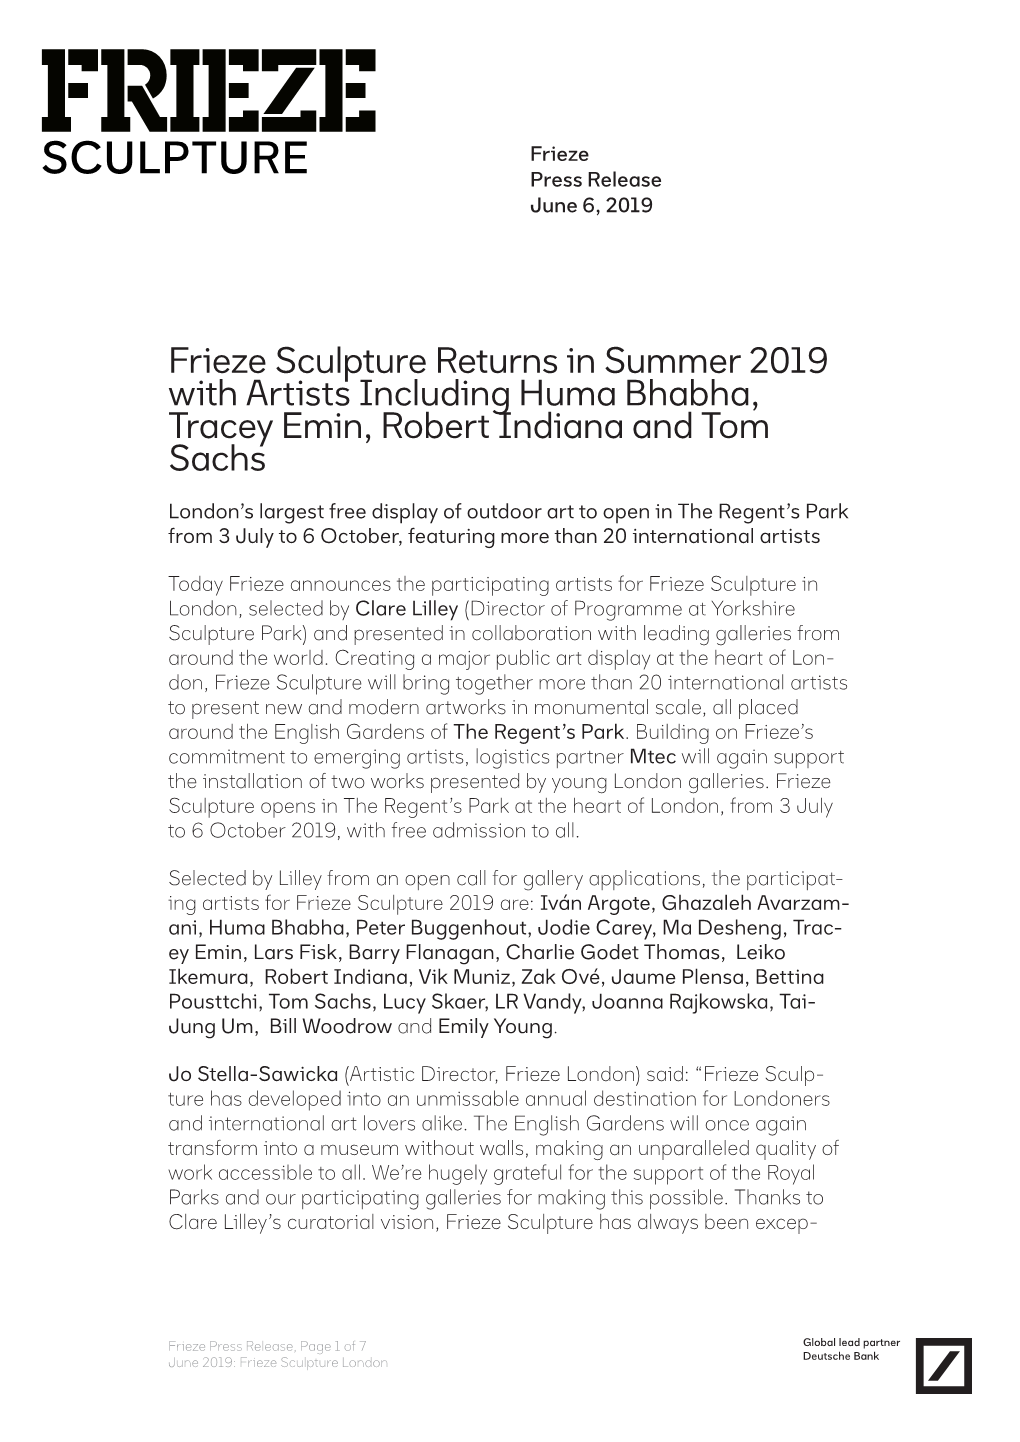 Frieze Sculpture Returns in Summer 2019 with Artists Including Huma Bhabha, Tracey Emin, Robert Indiana and Tom Sachs